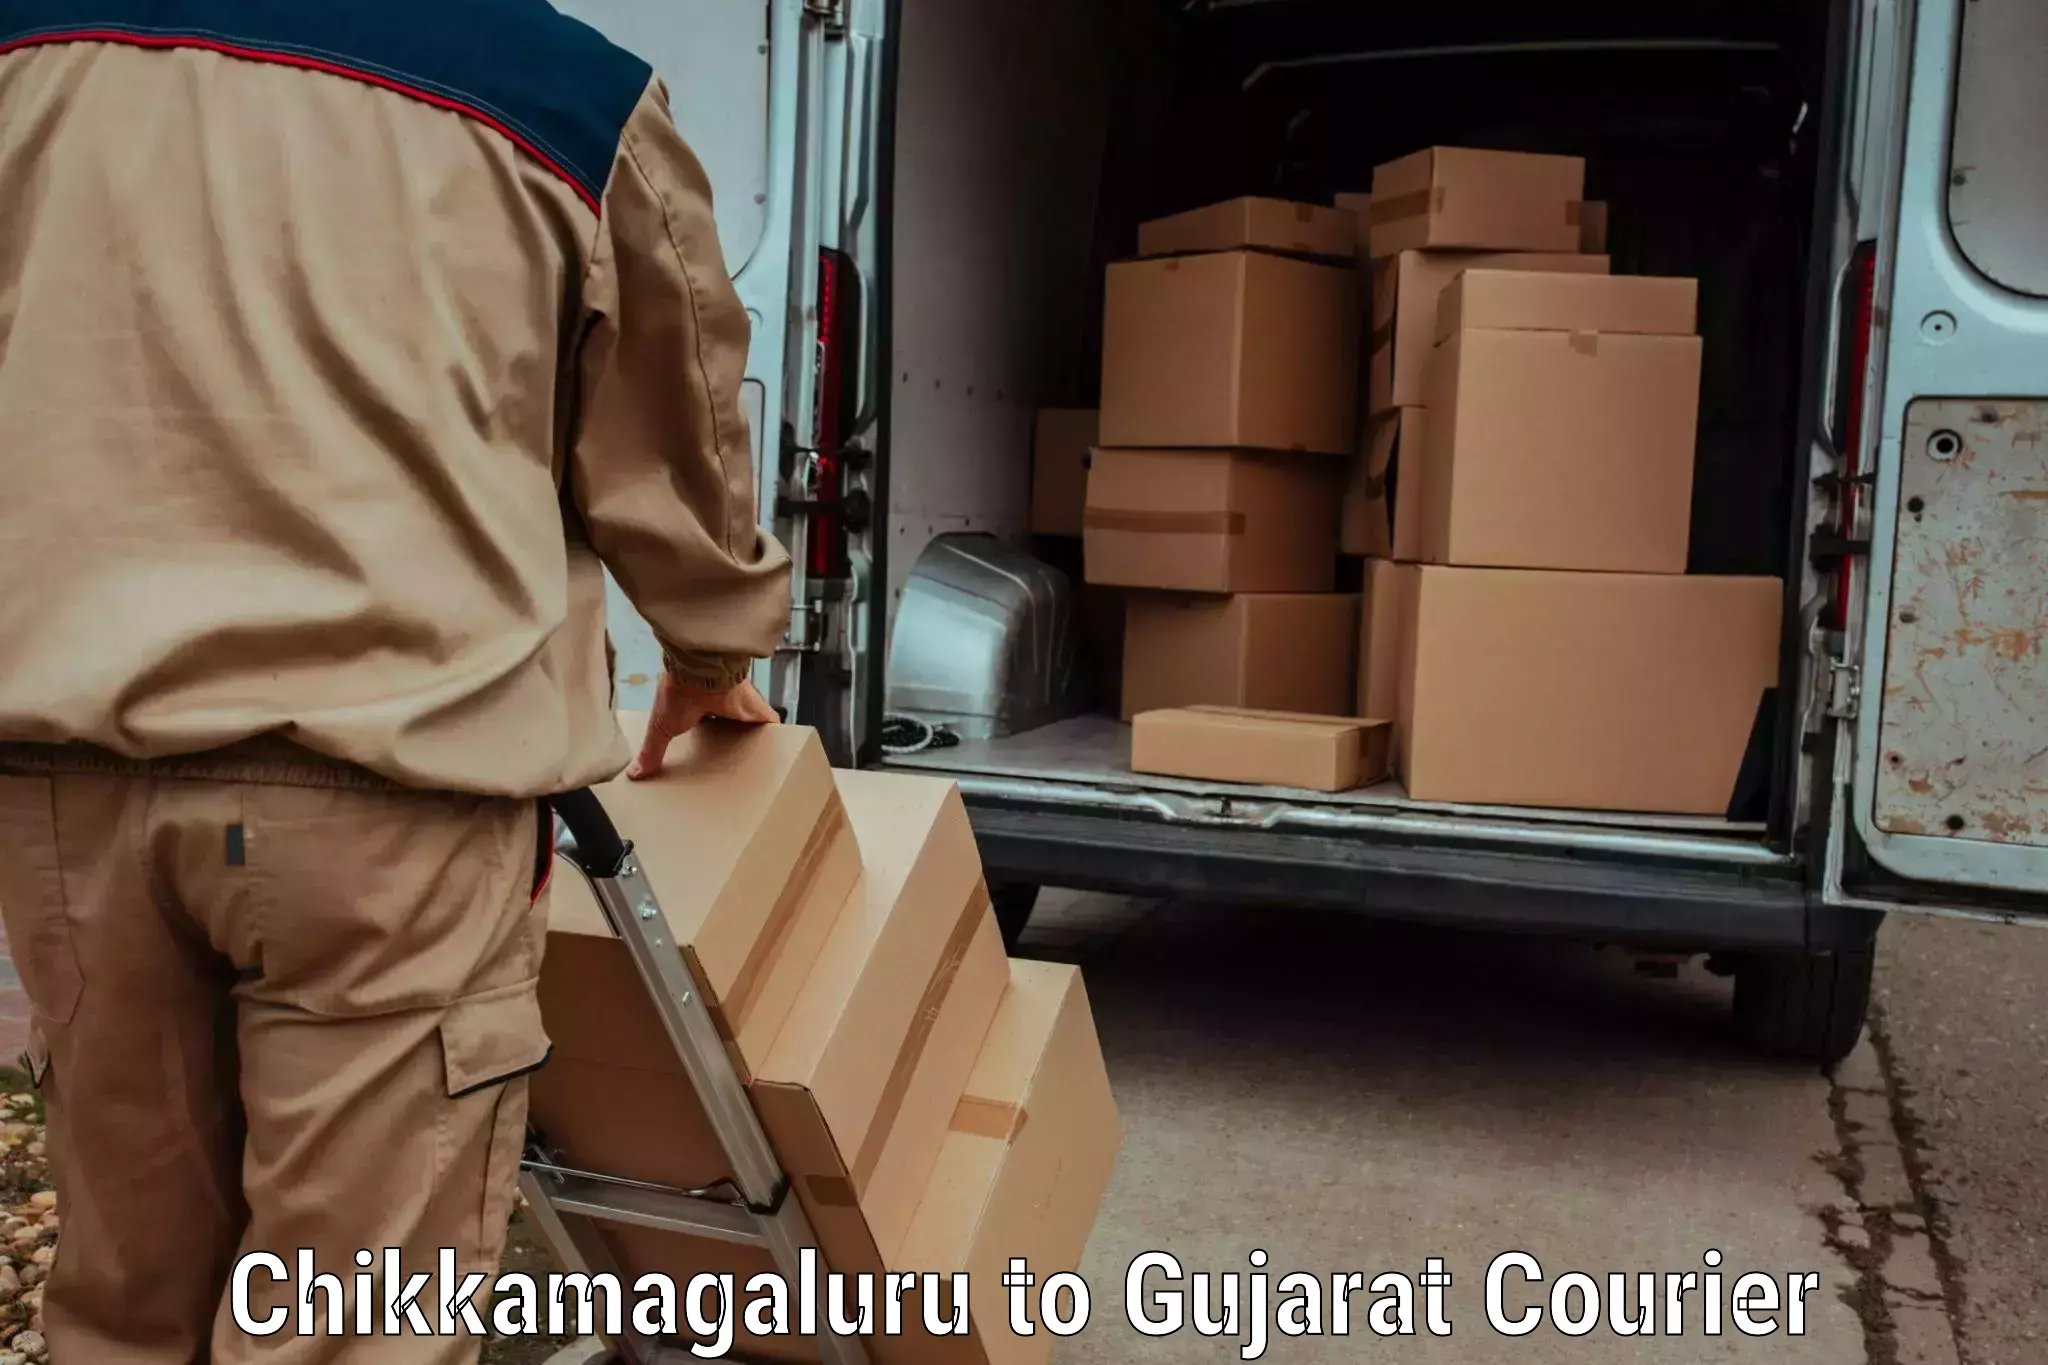 Flexible delivery scheduling Chikkamagaluru to GIDC